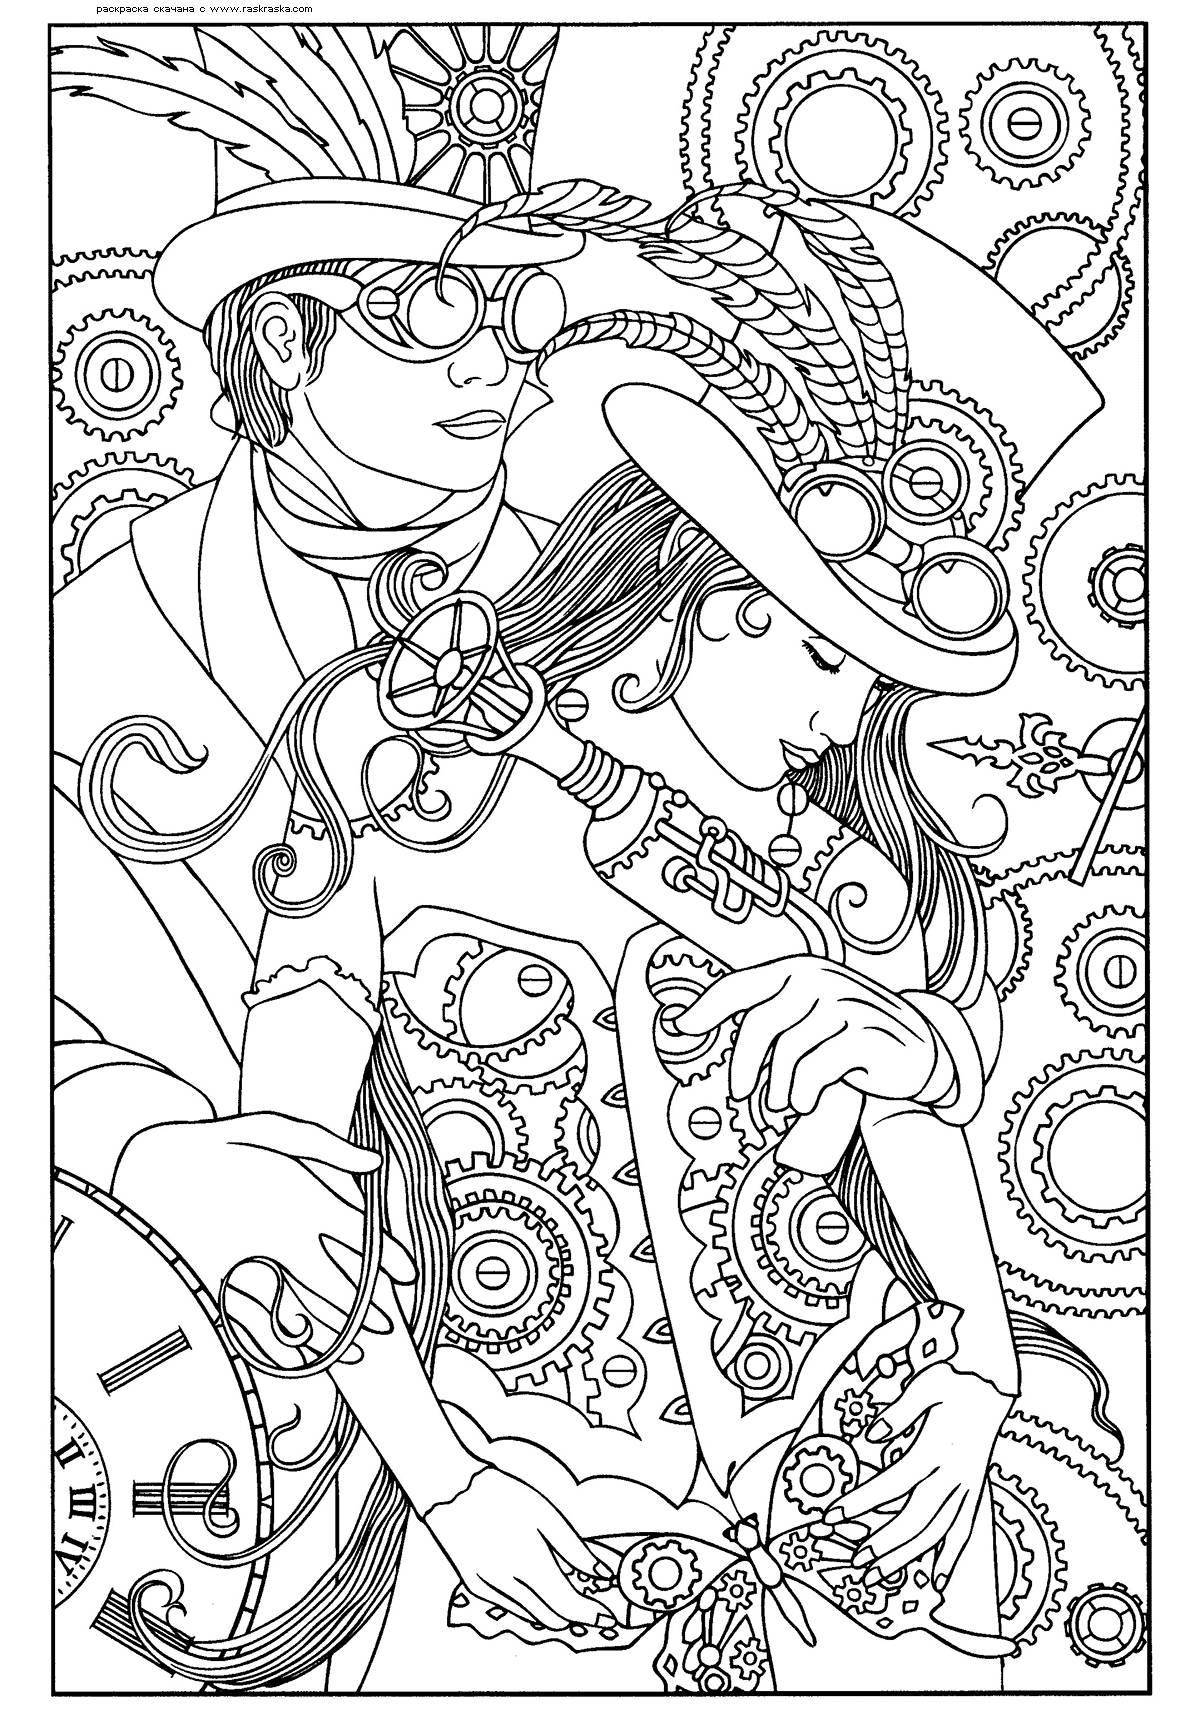 Dazzling adult coloring book 18